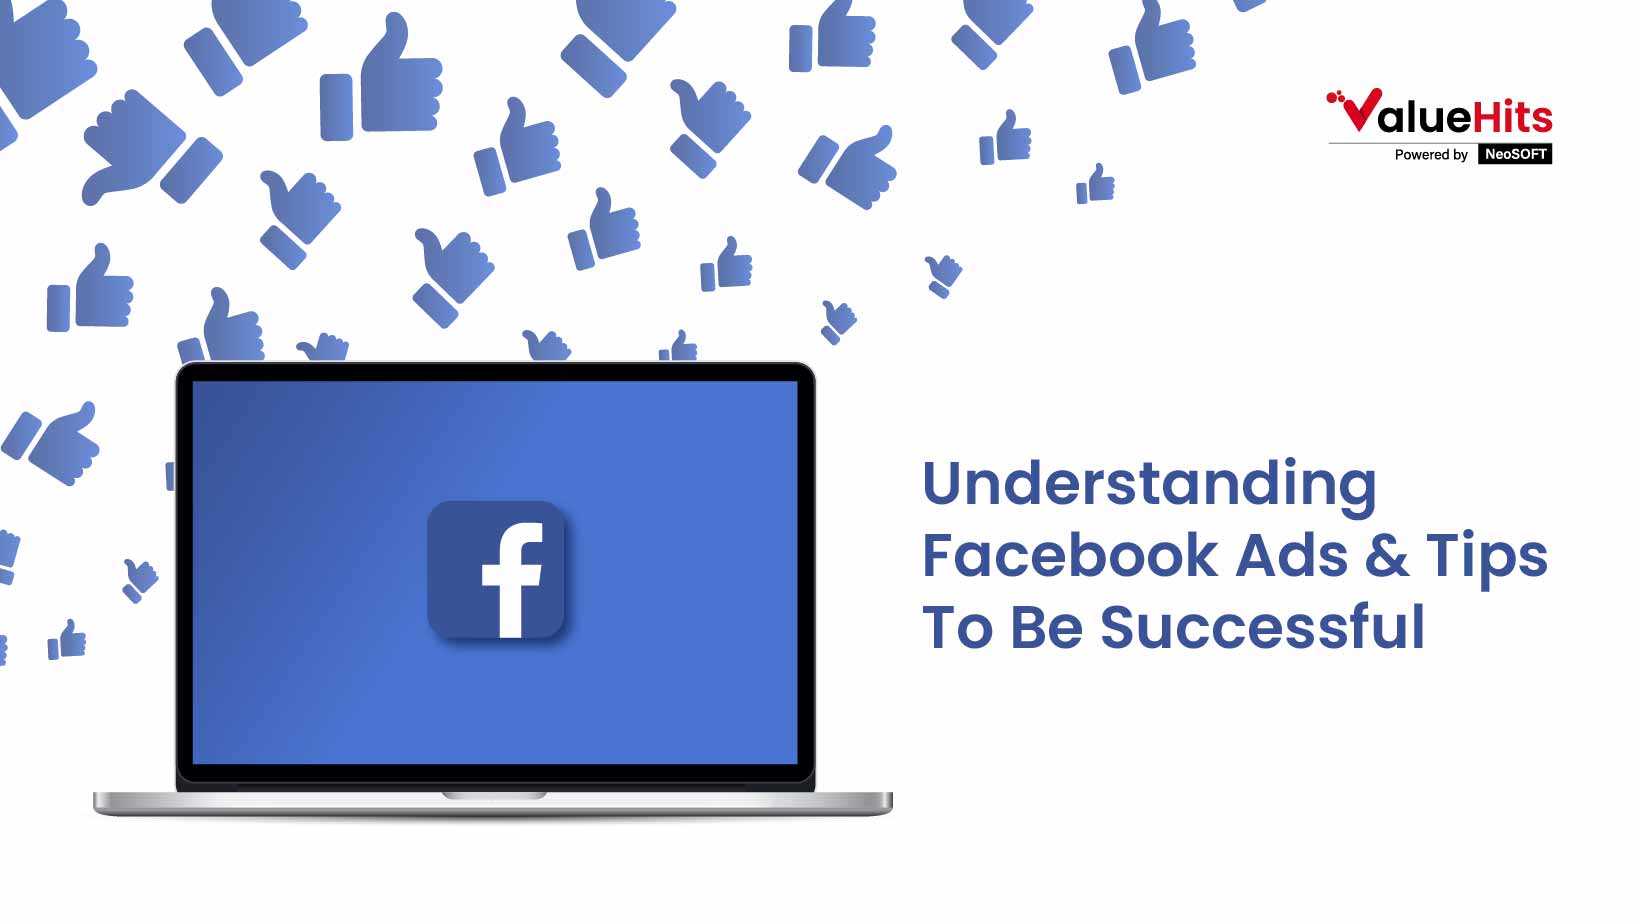 Understanding Facebook Ads & Tips To Be Successful